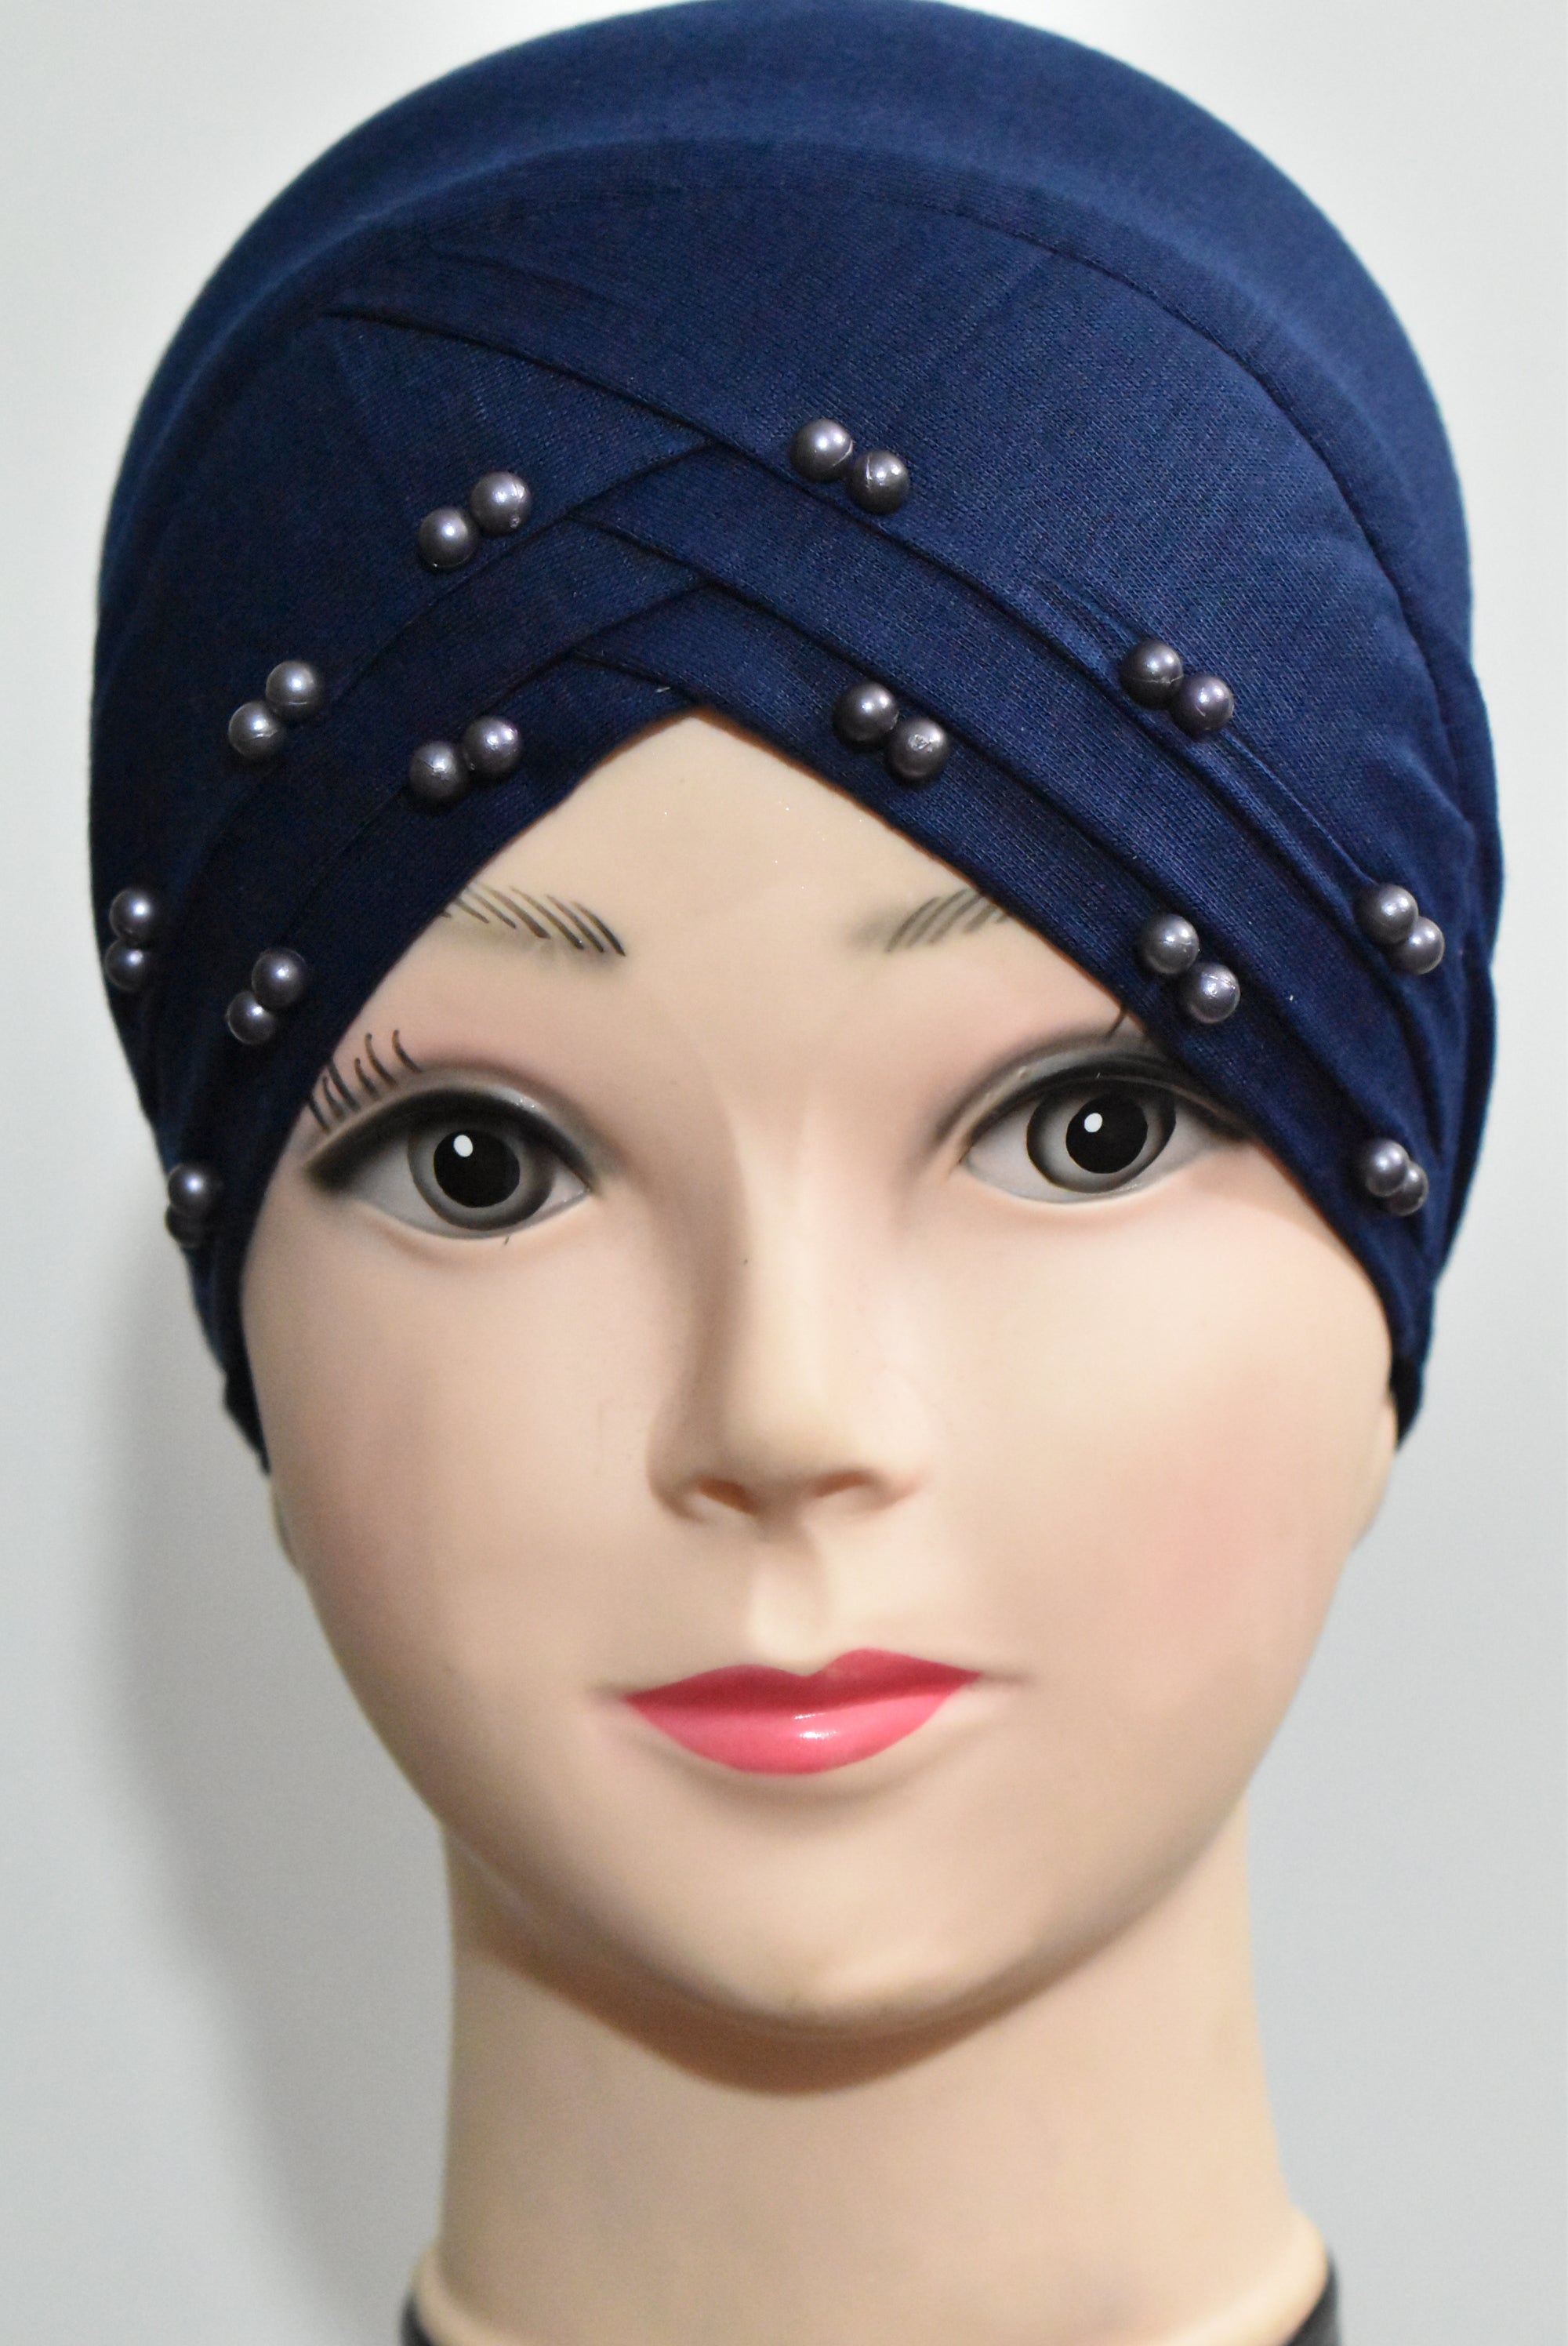 Pleated Undercap With Beads (Tieable)